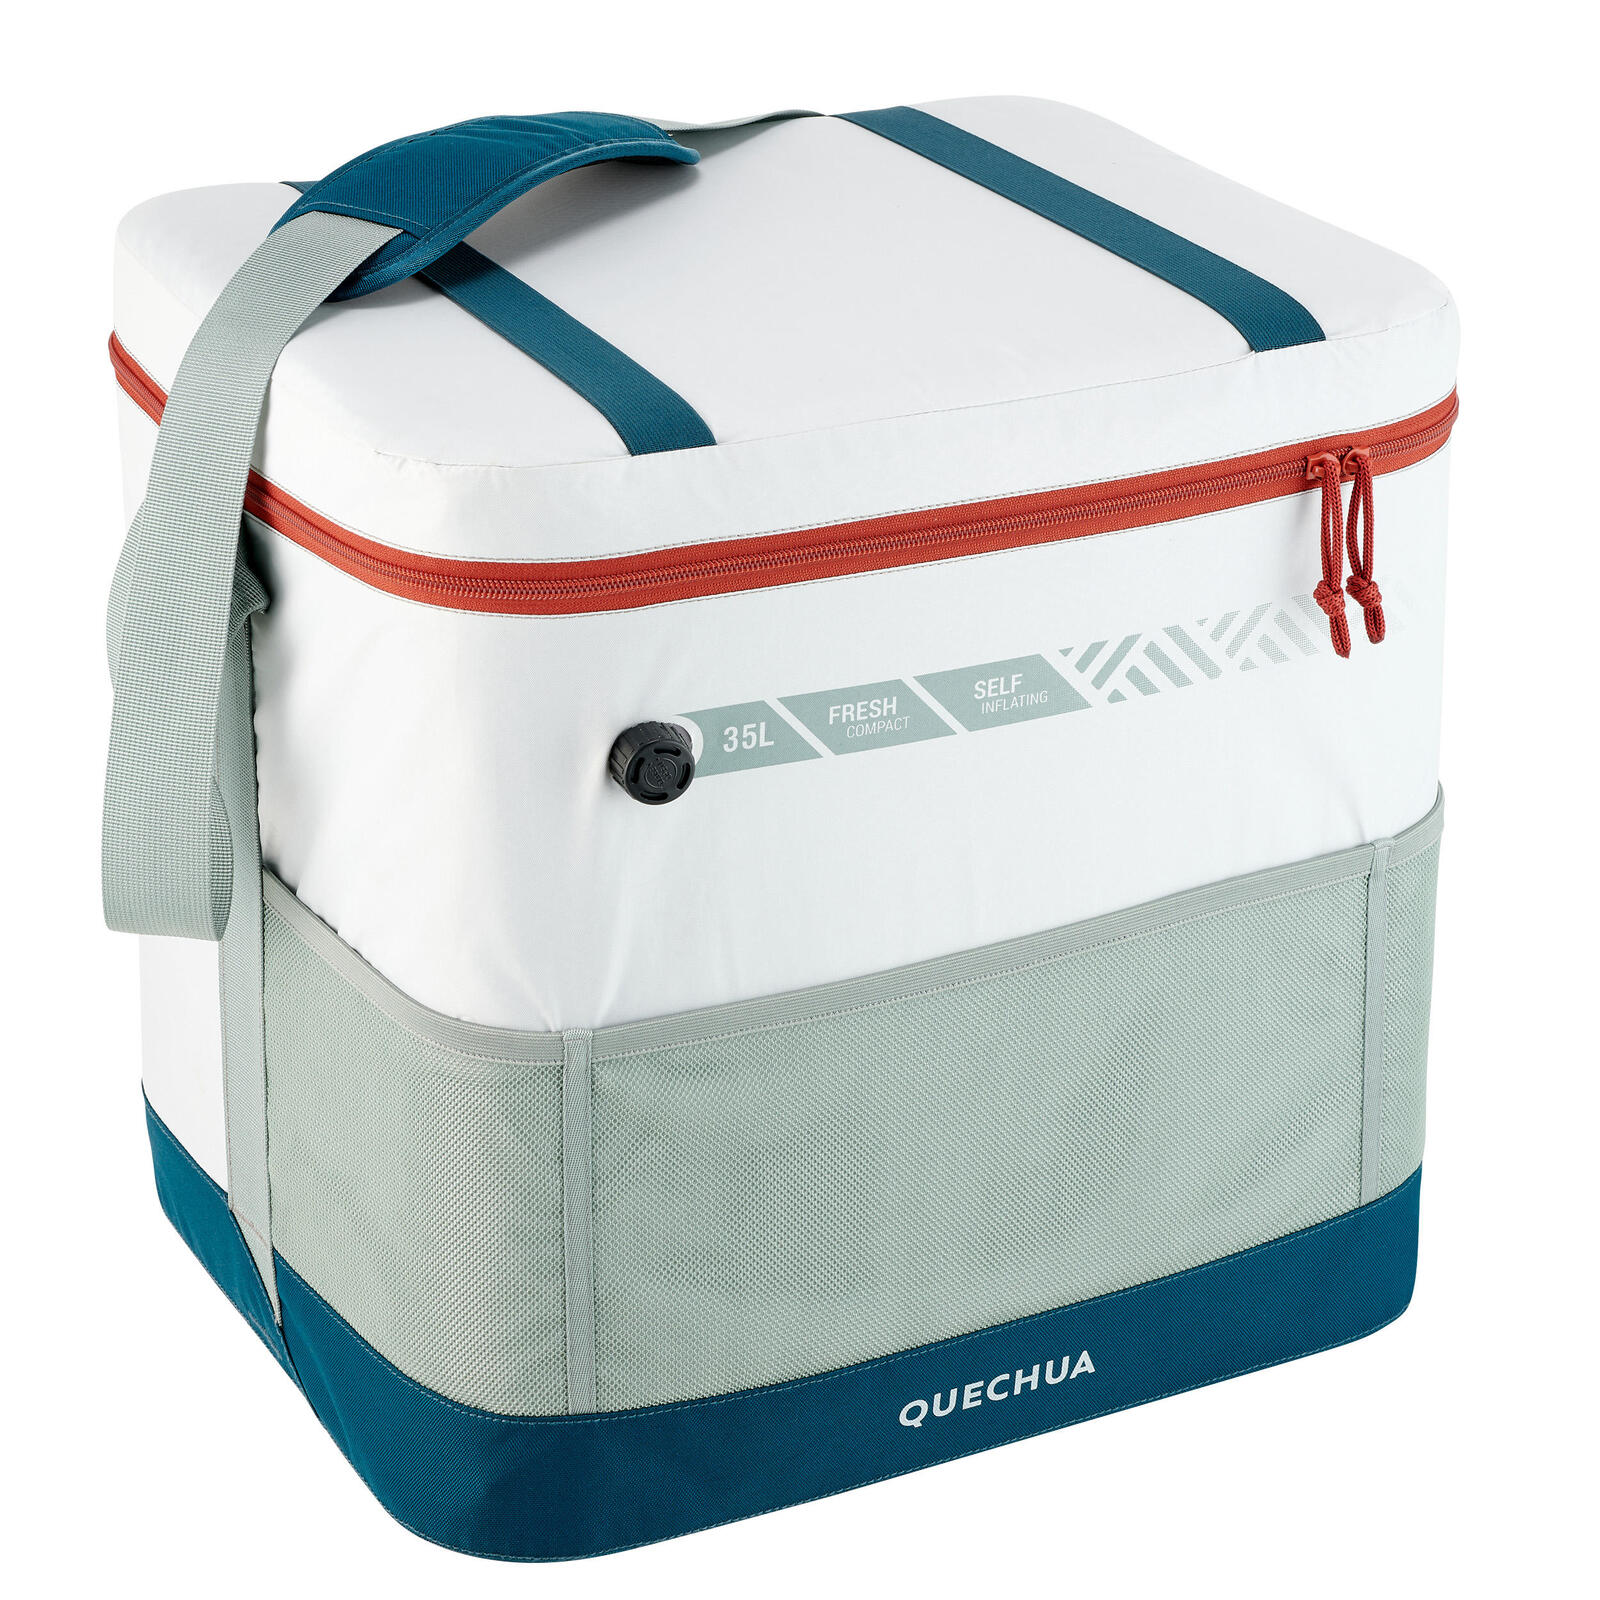 Inflatable camping or hiking cooler - compact fresh – 35 l